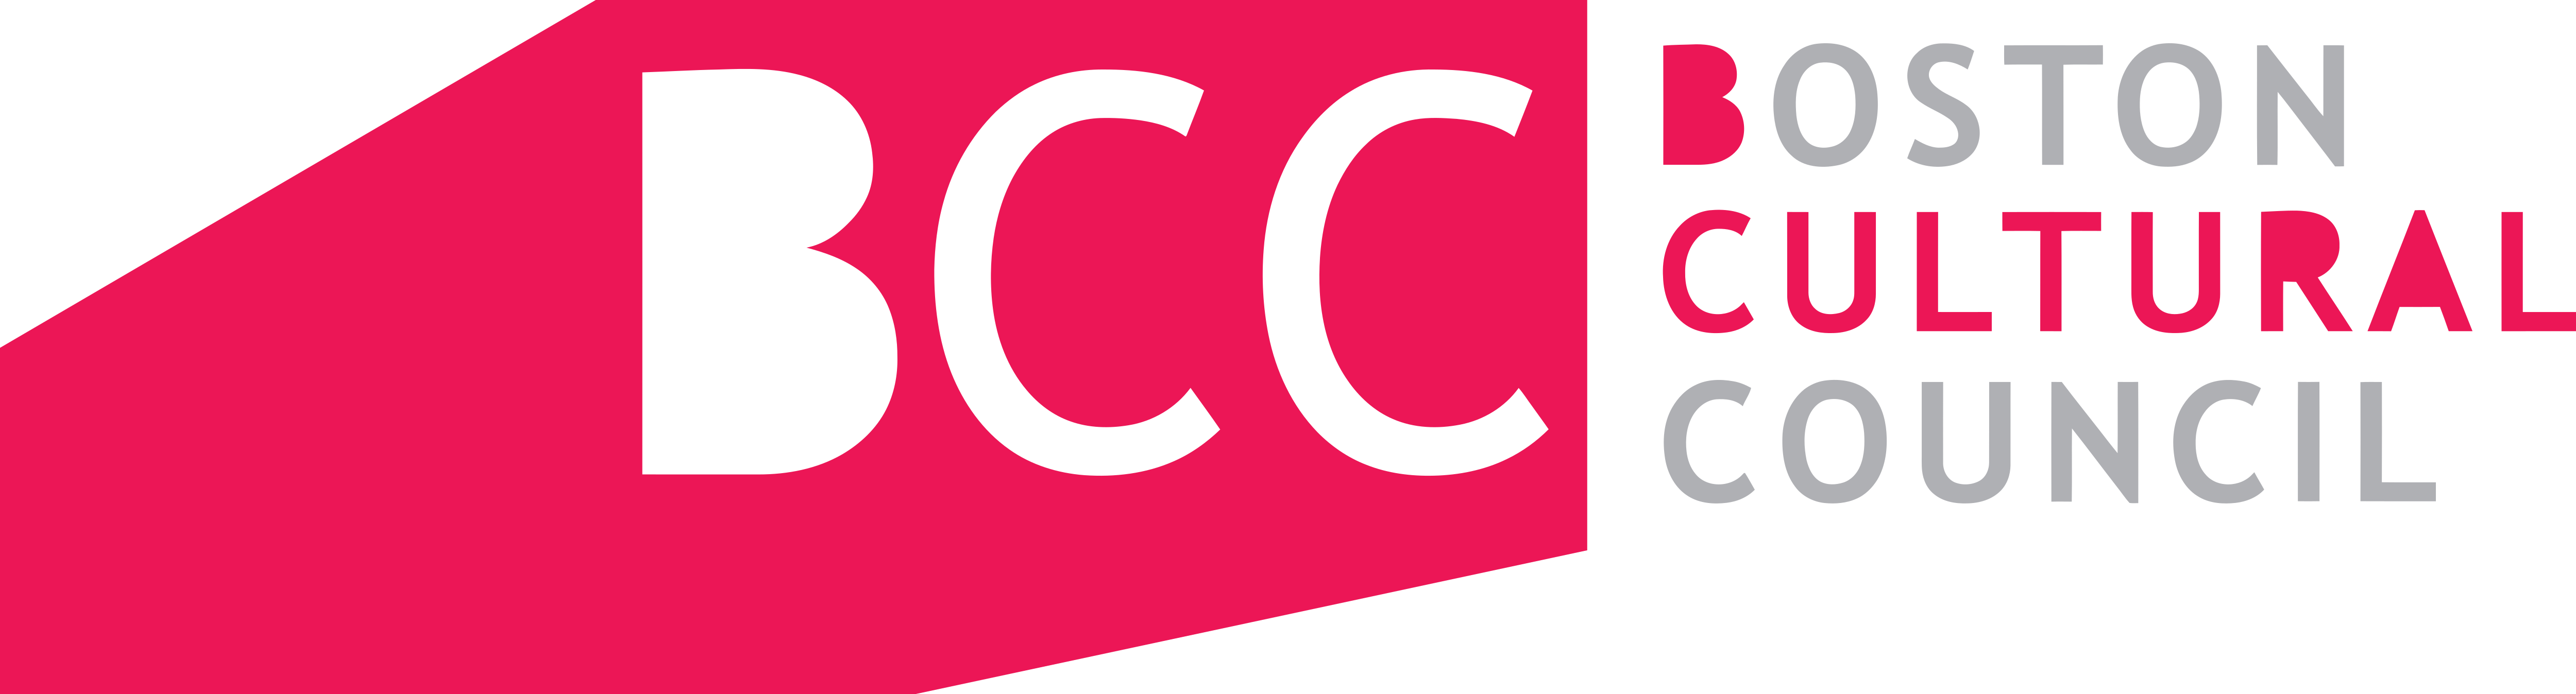 Boston Cultural Council logo white text on red background